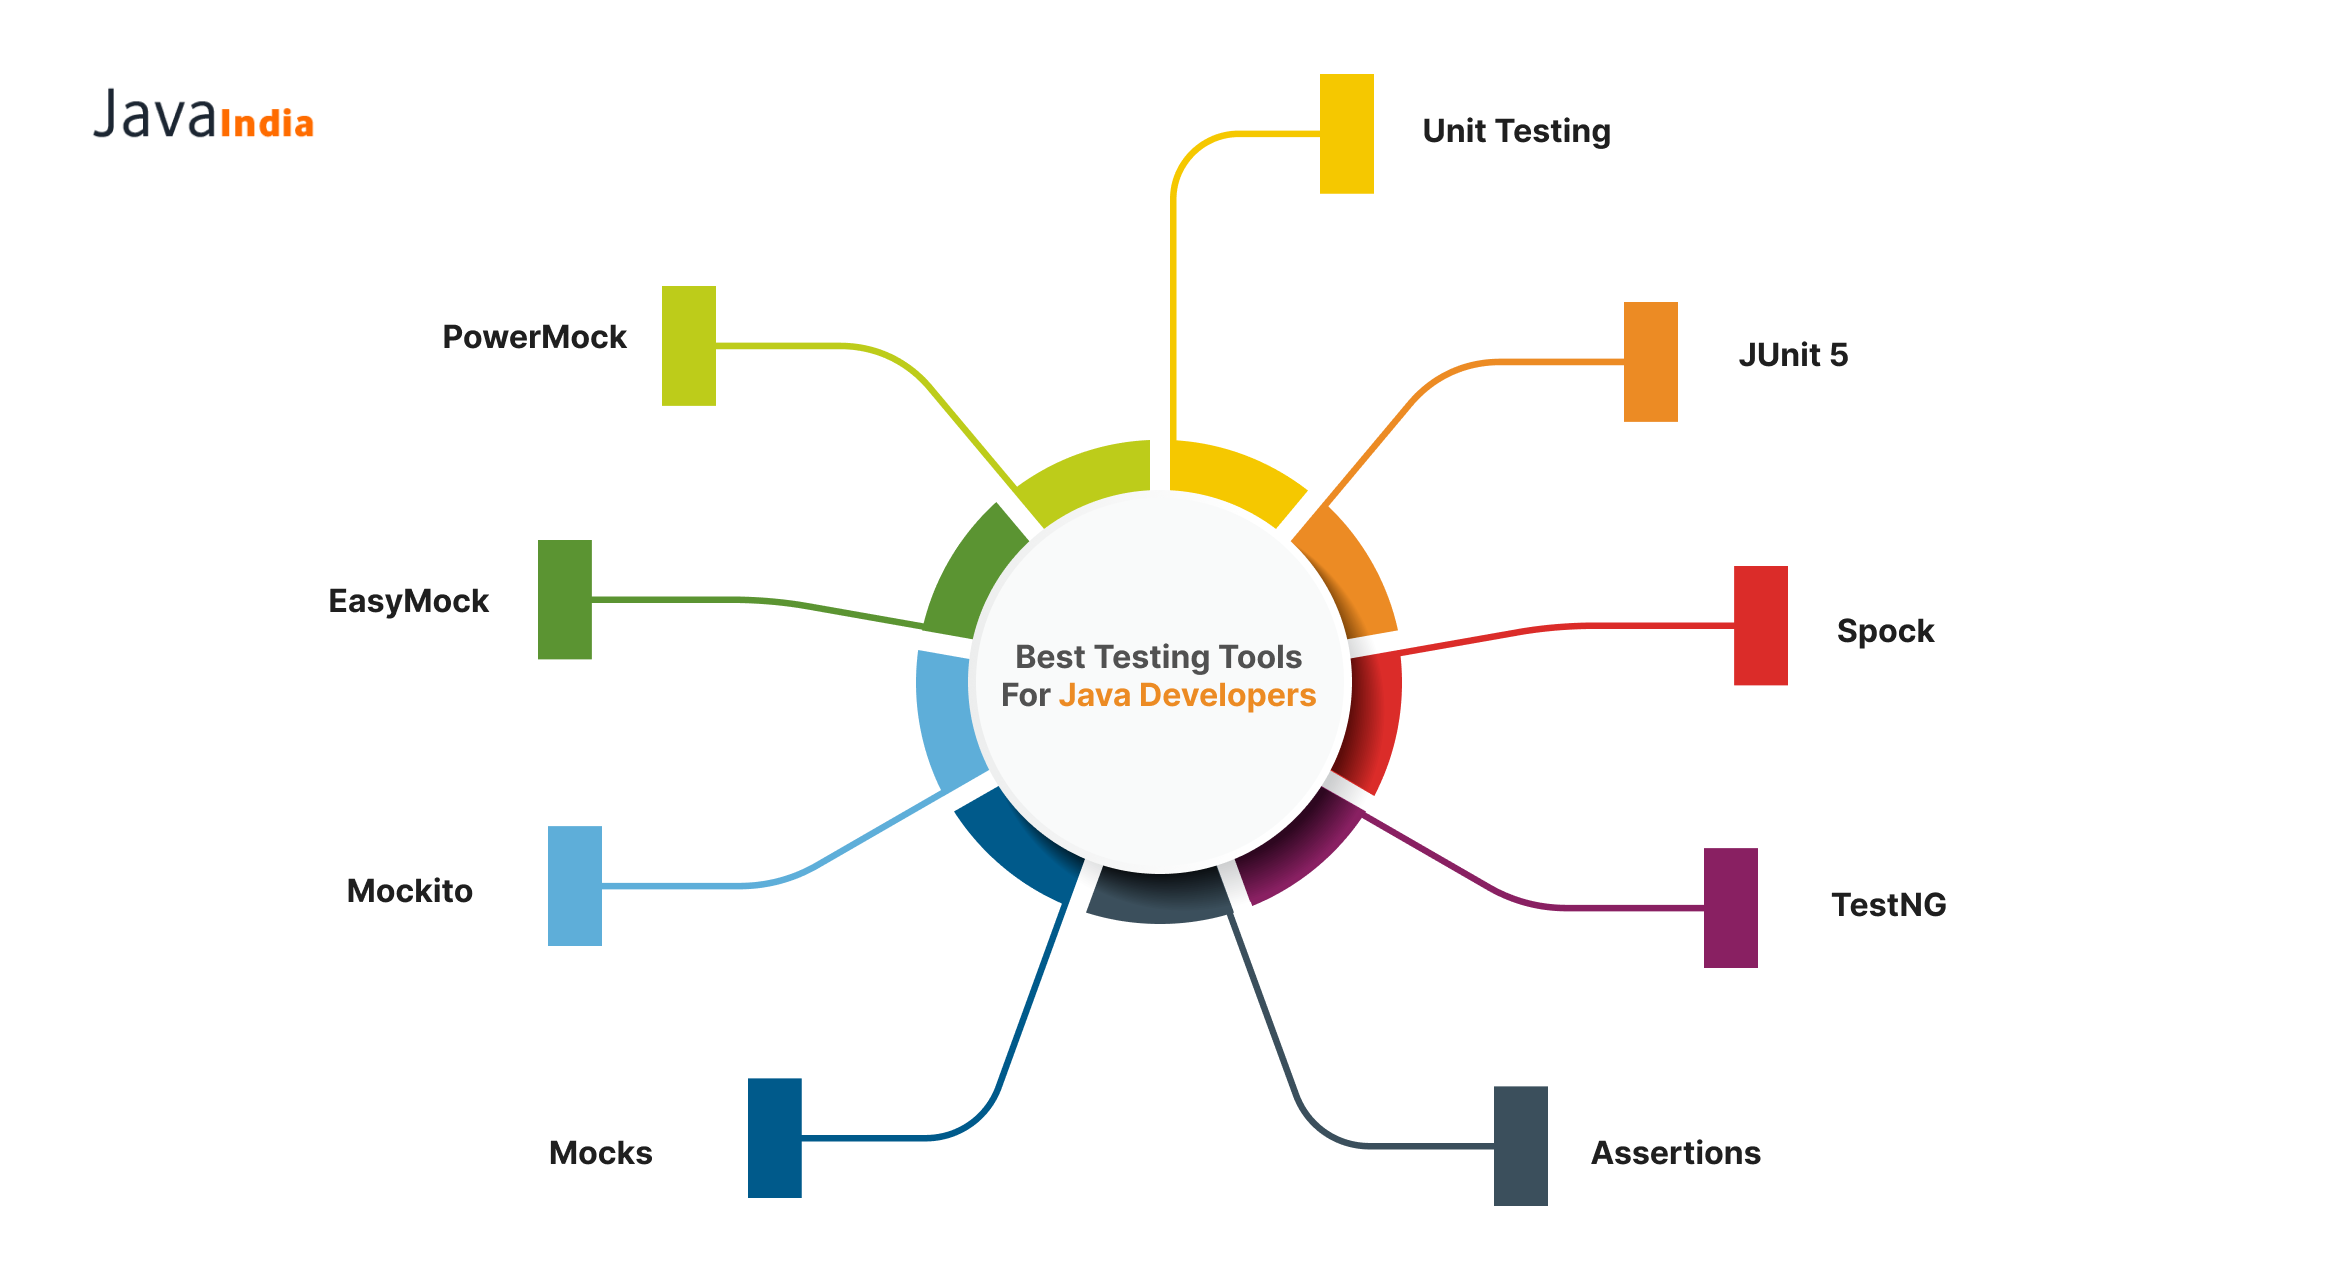 Best testing tools for Java developers